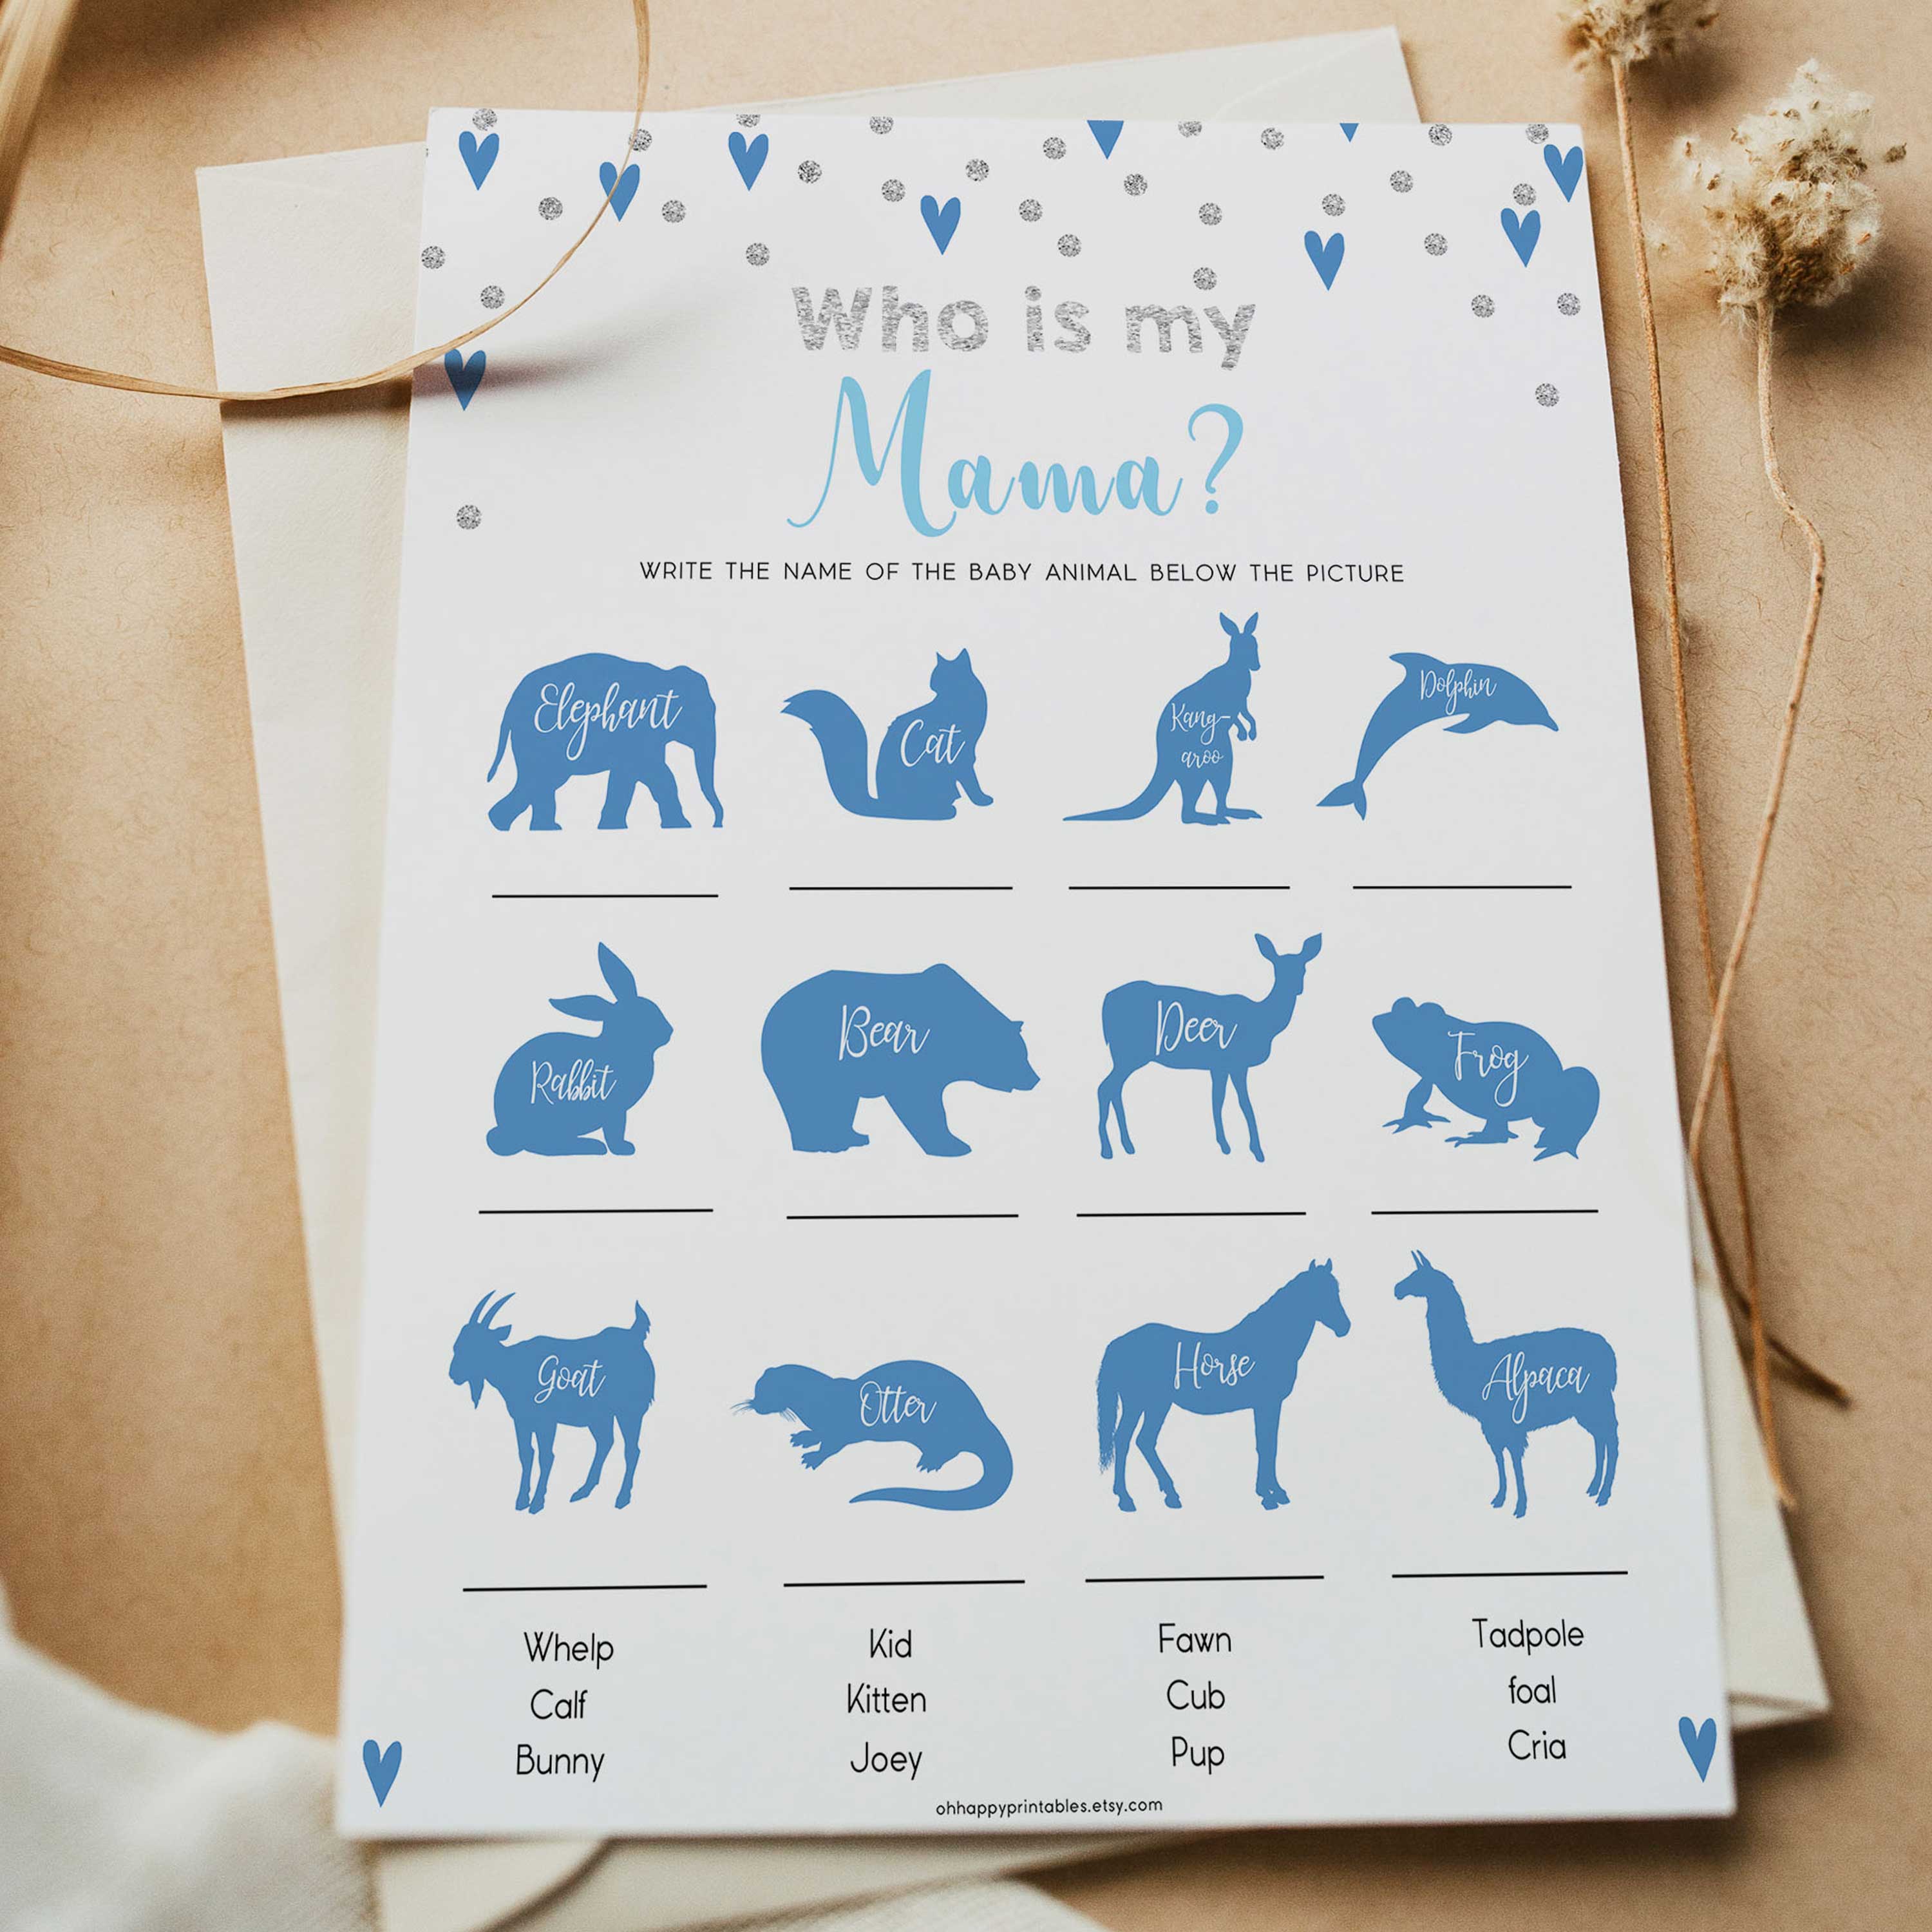 who is my mama game, Printable baby shower games, small blue hearts fun baby games, baby shower games, fun baby shower ideas, top baby shower ideas, silver baby shower, blue hearts baby shower ideas